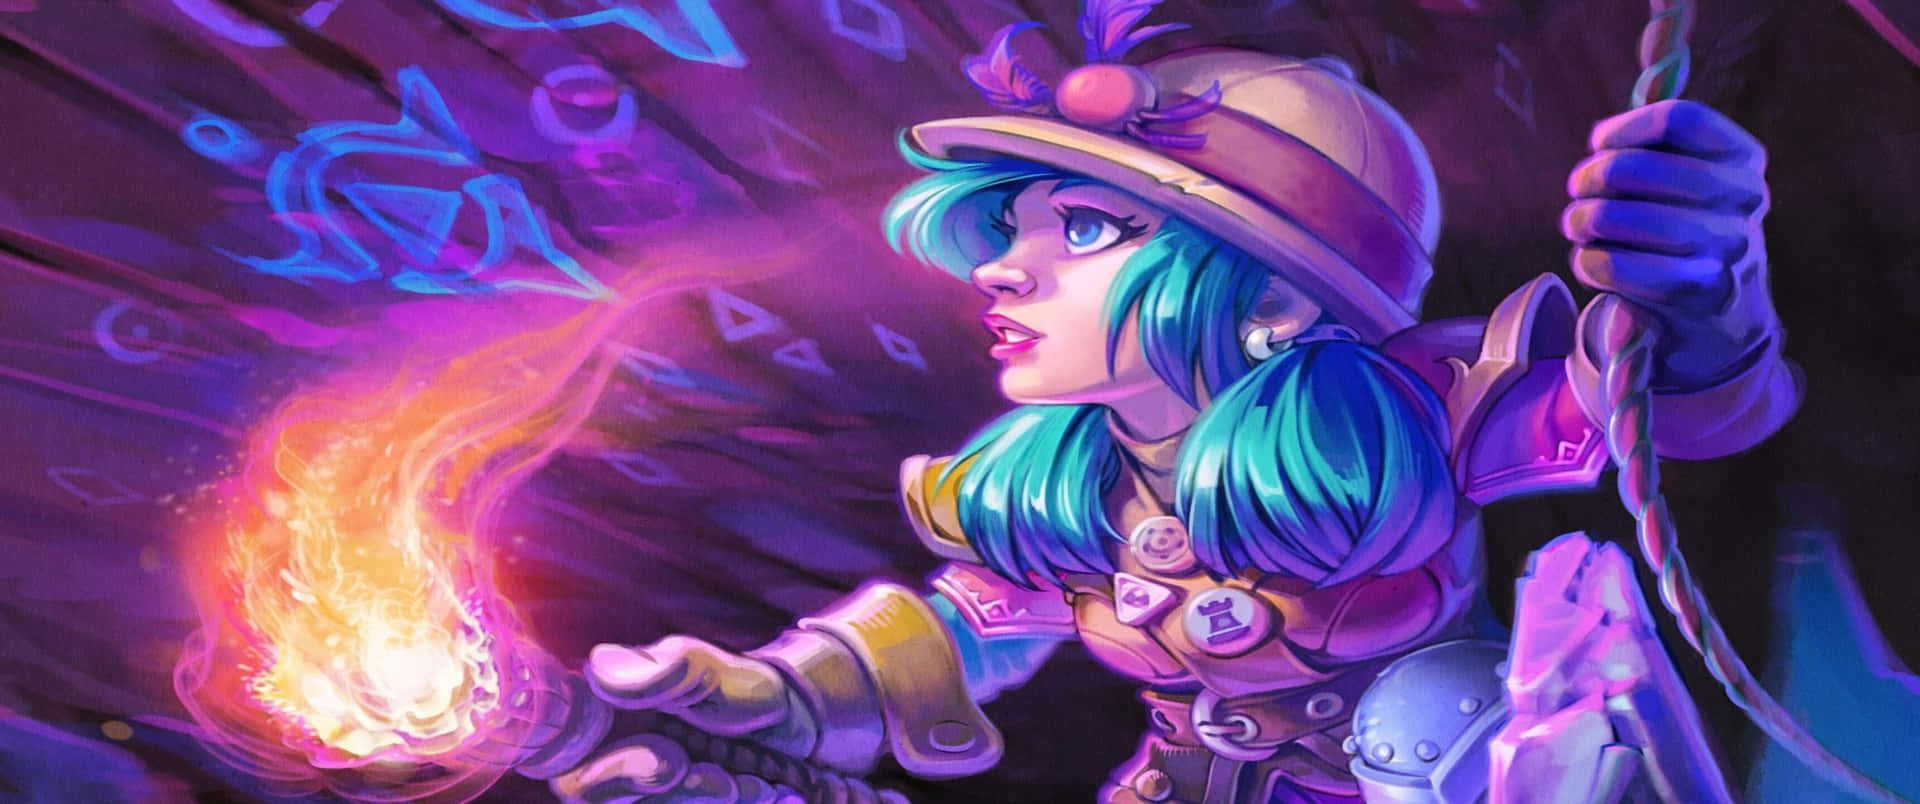 Beautiful colorful landscape of the virtual world of Hearthstone